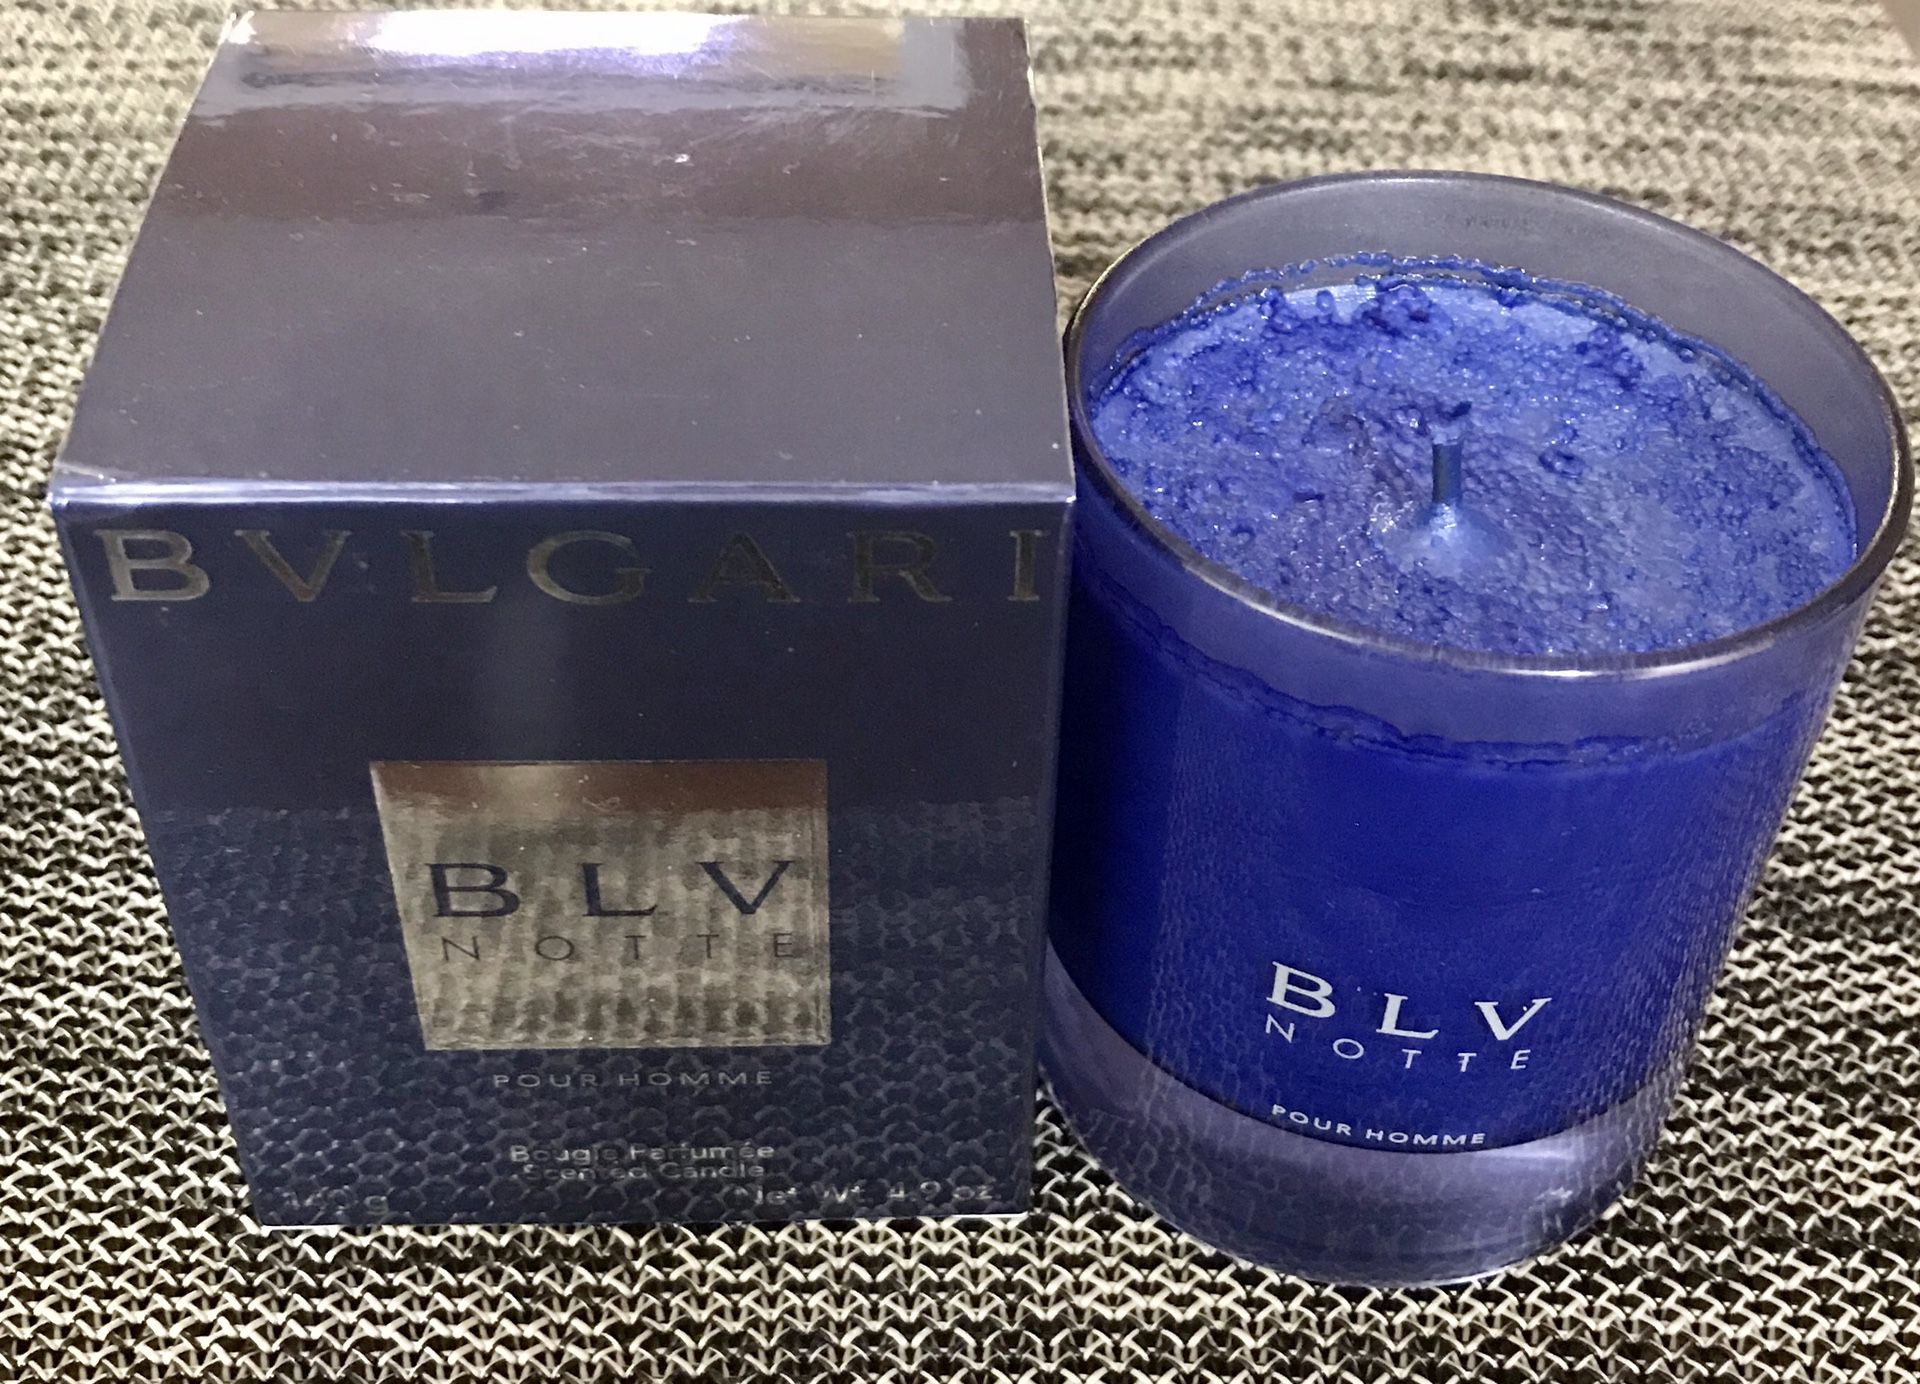 Bvlgari BLV NOTTE candle